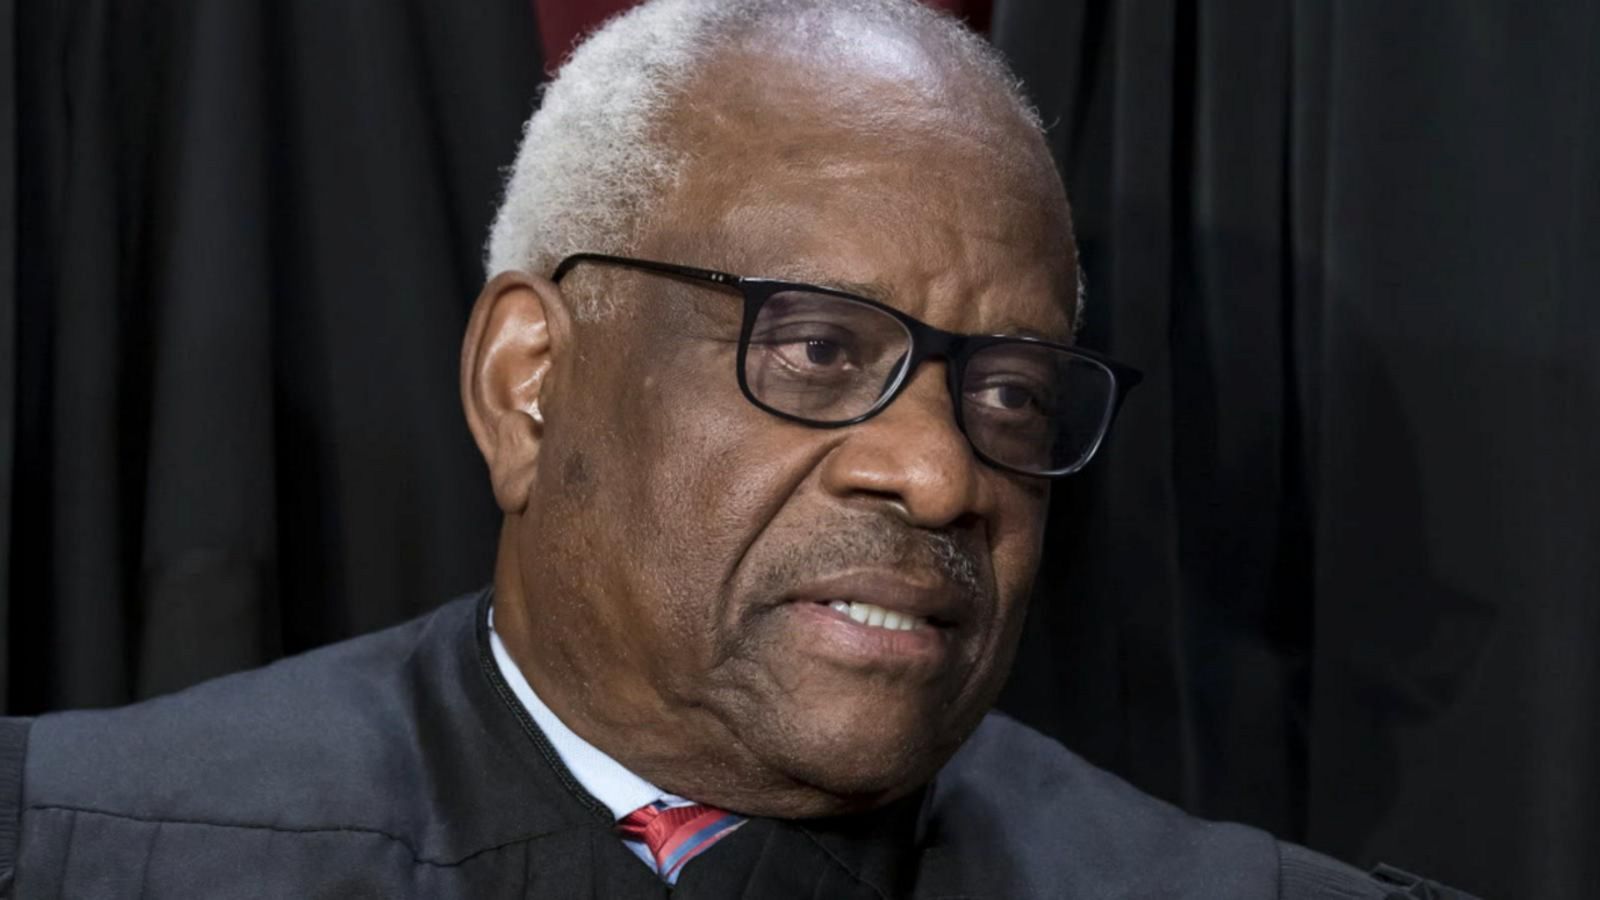 VIDEO: Justice Thomas under new scrutiny about loan from wealthy friend